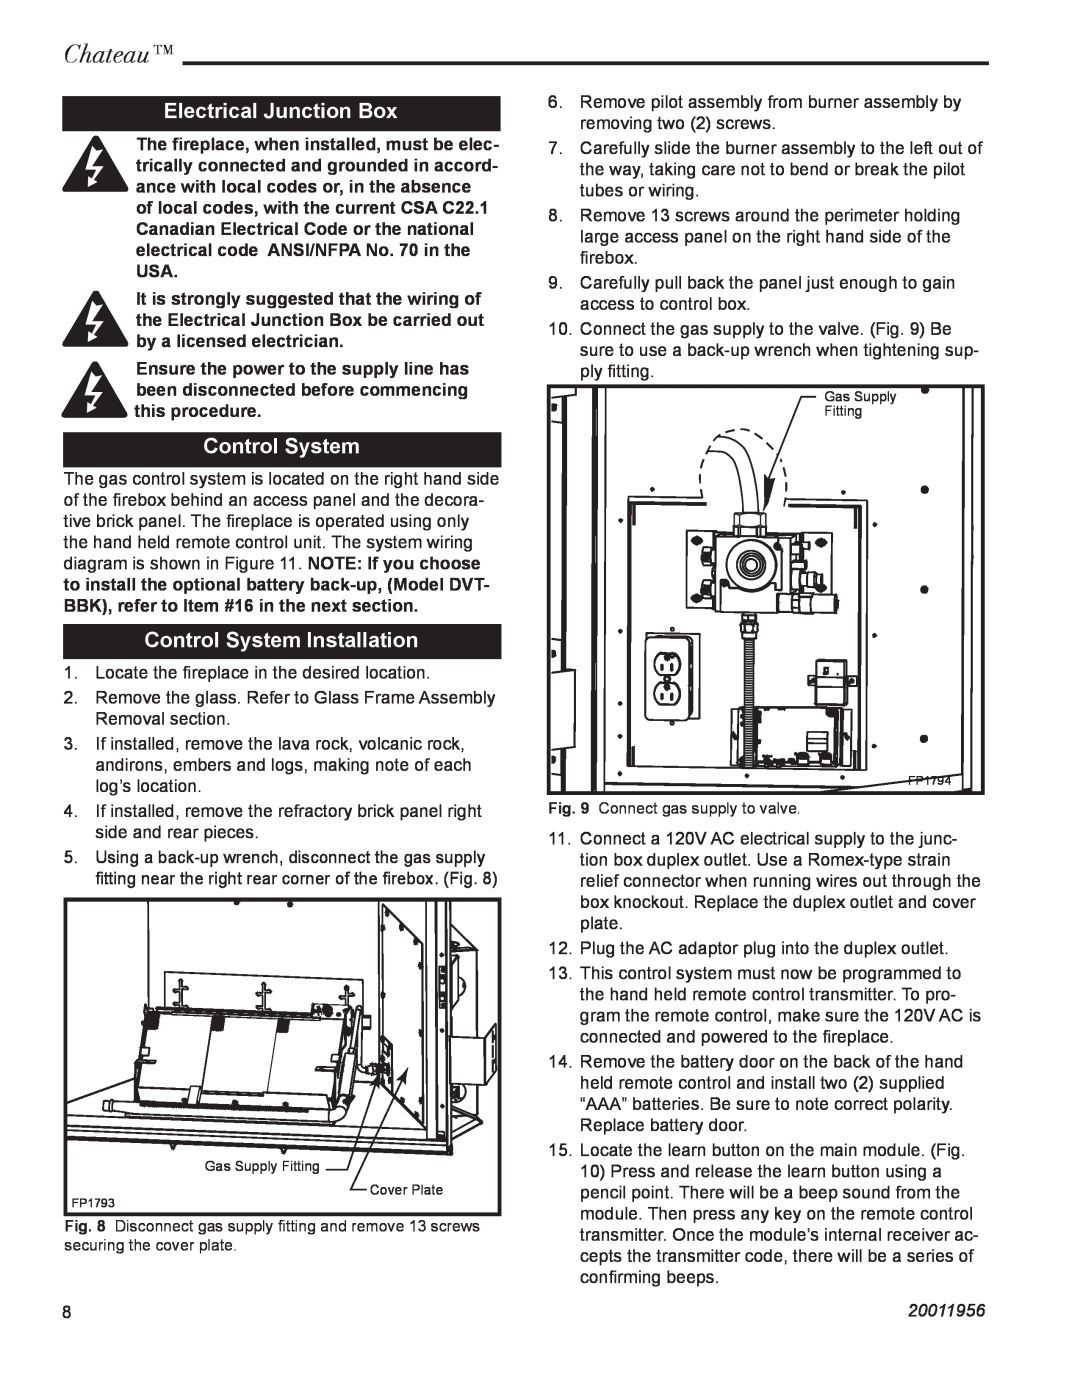 Vermont Casting DVT44 installation instructions Electrical Junction Box, Control System Installation, Chateau, 20011956 